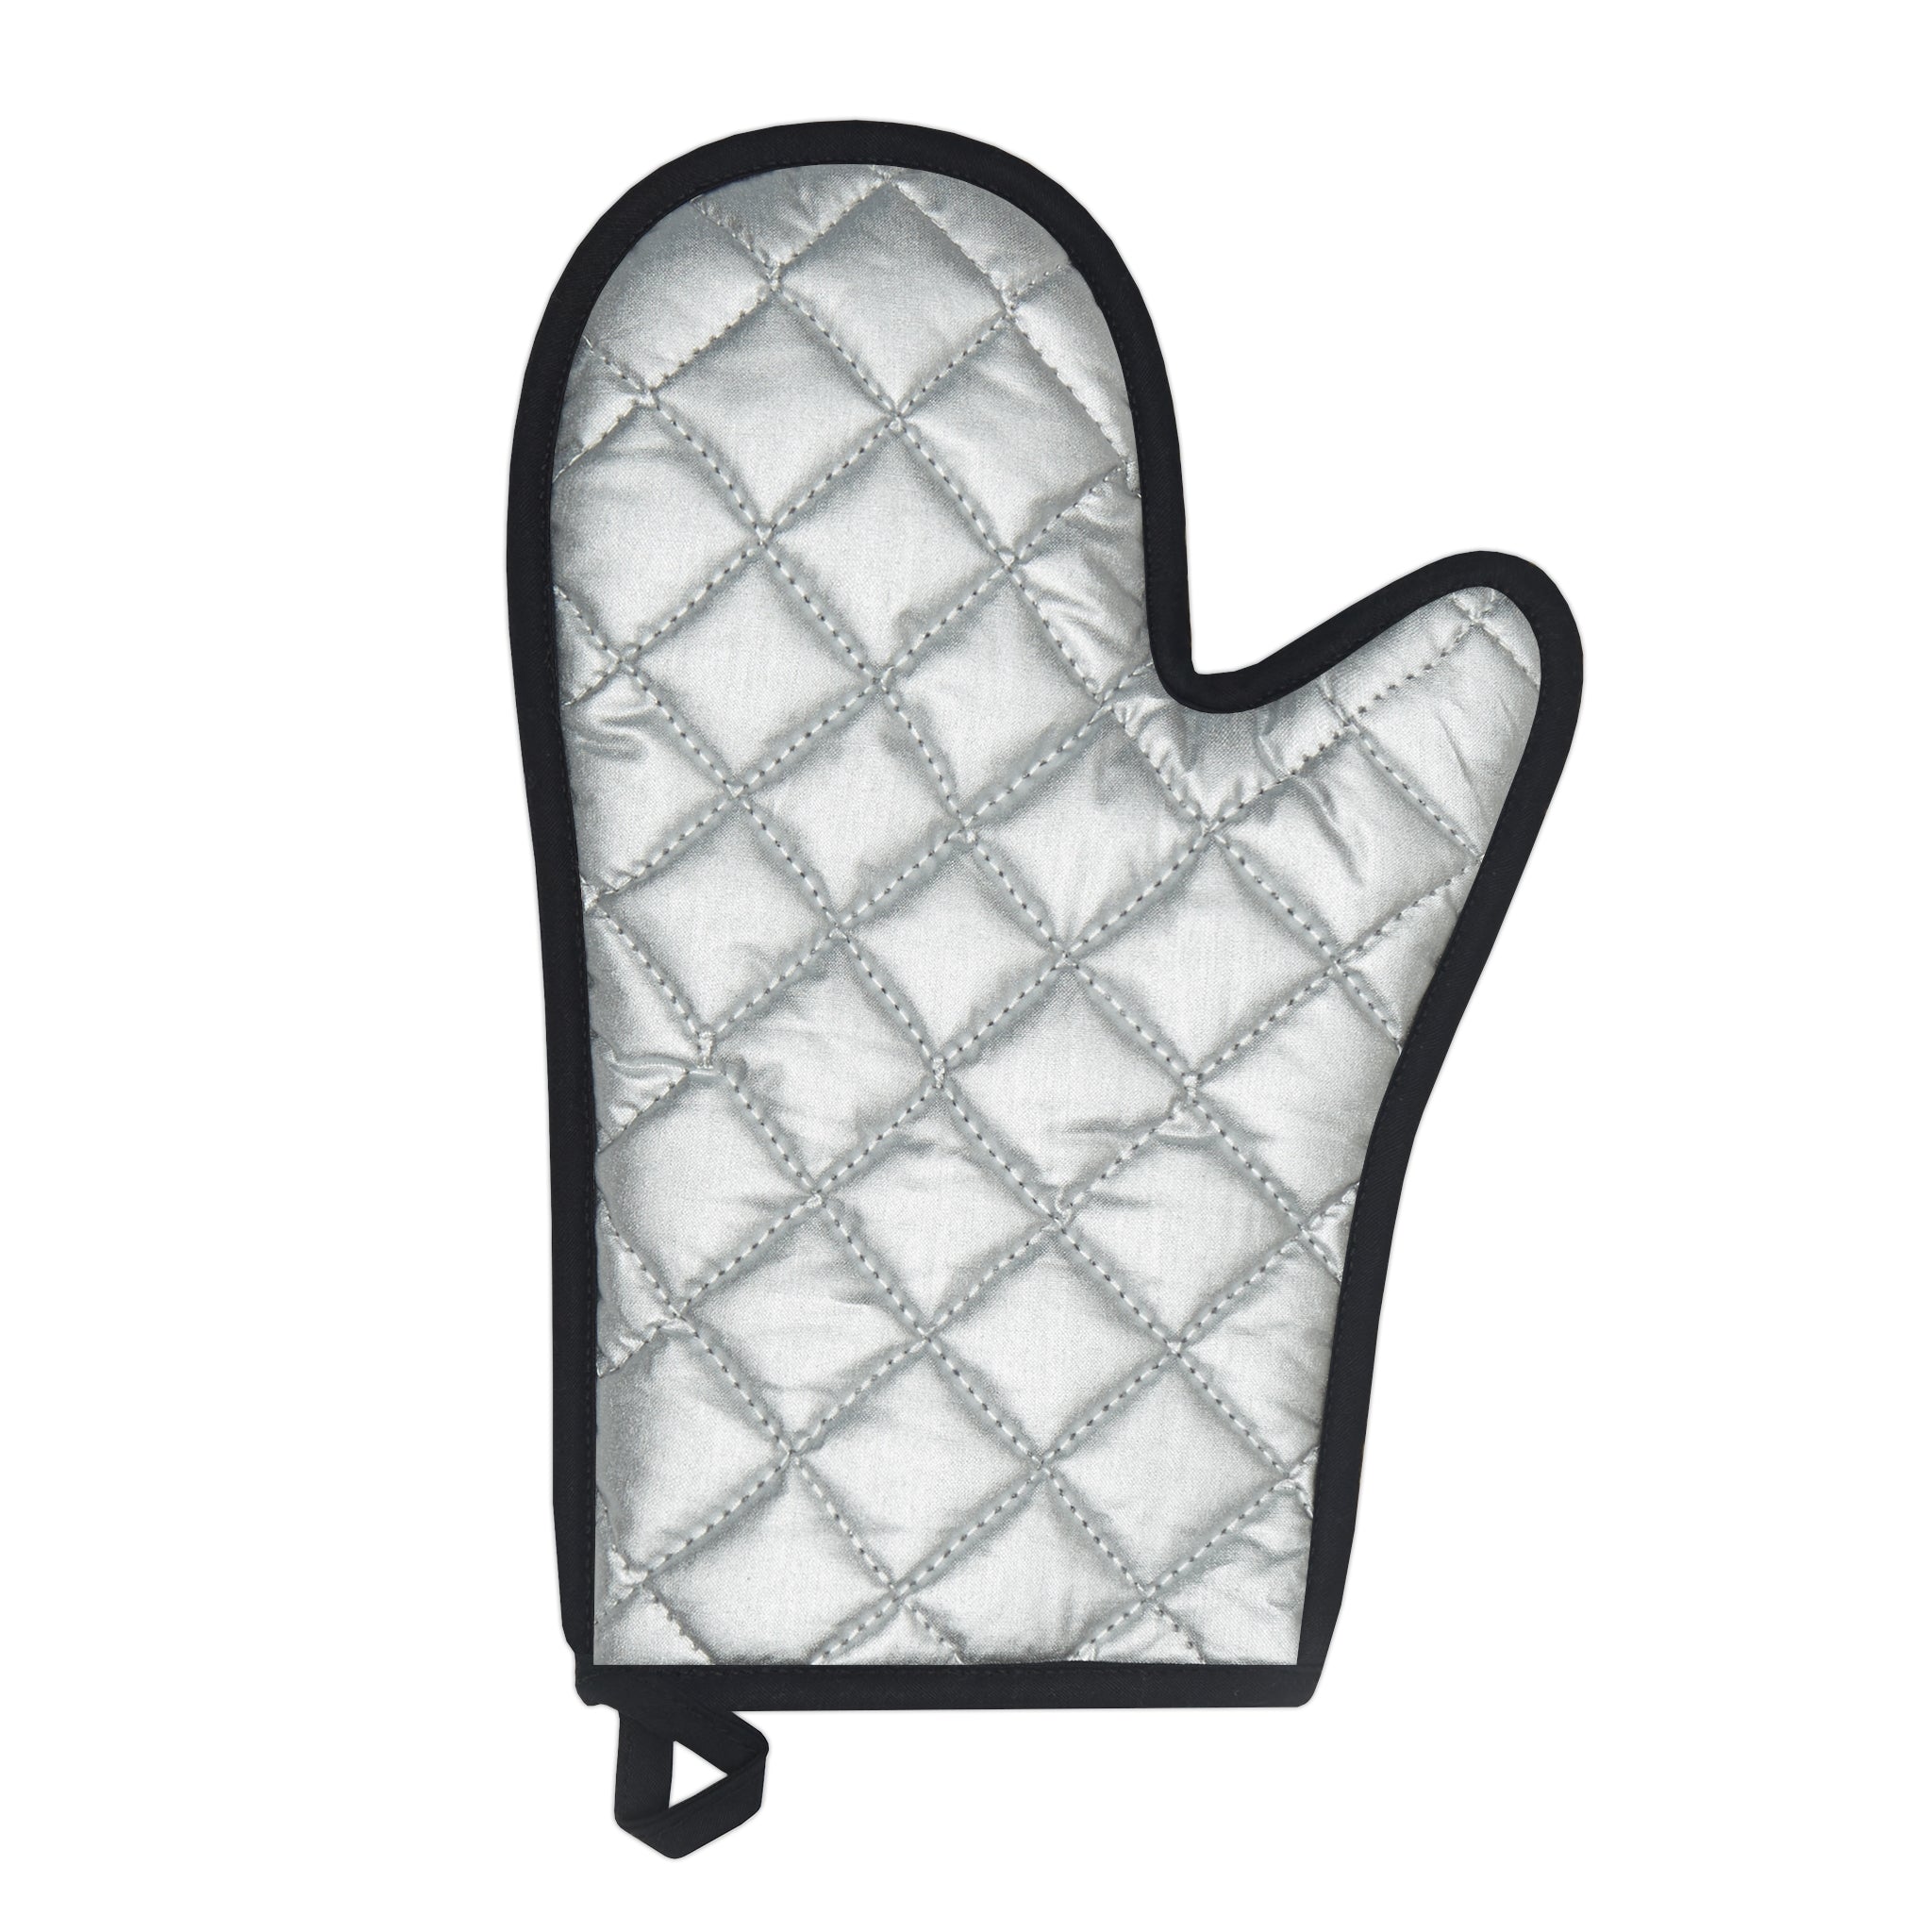 ACL Oven Glove